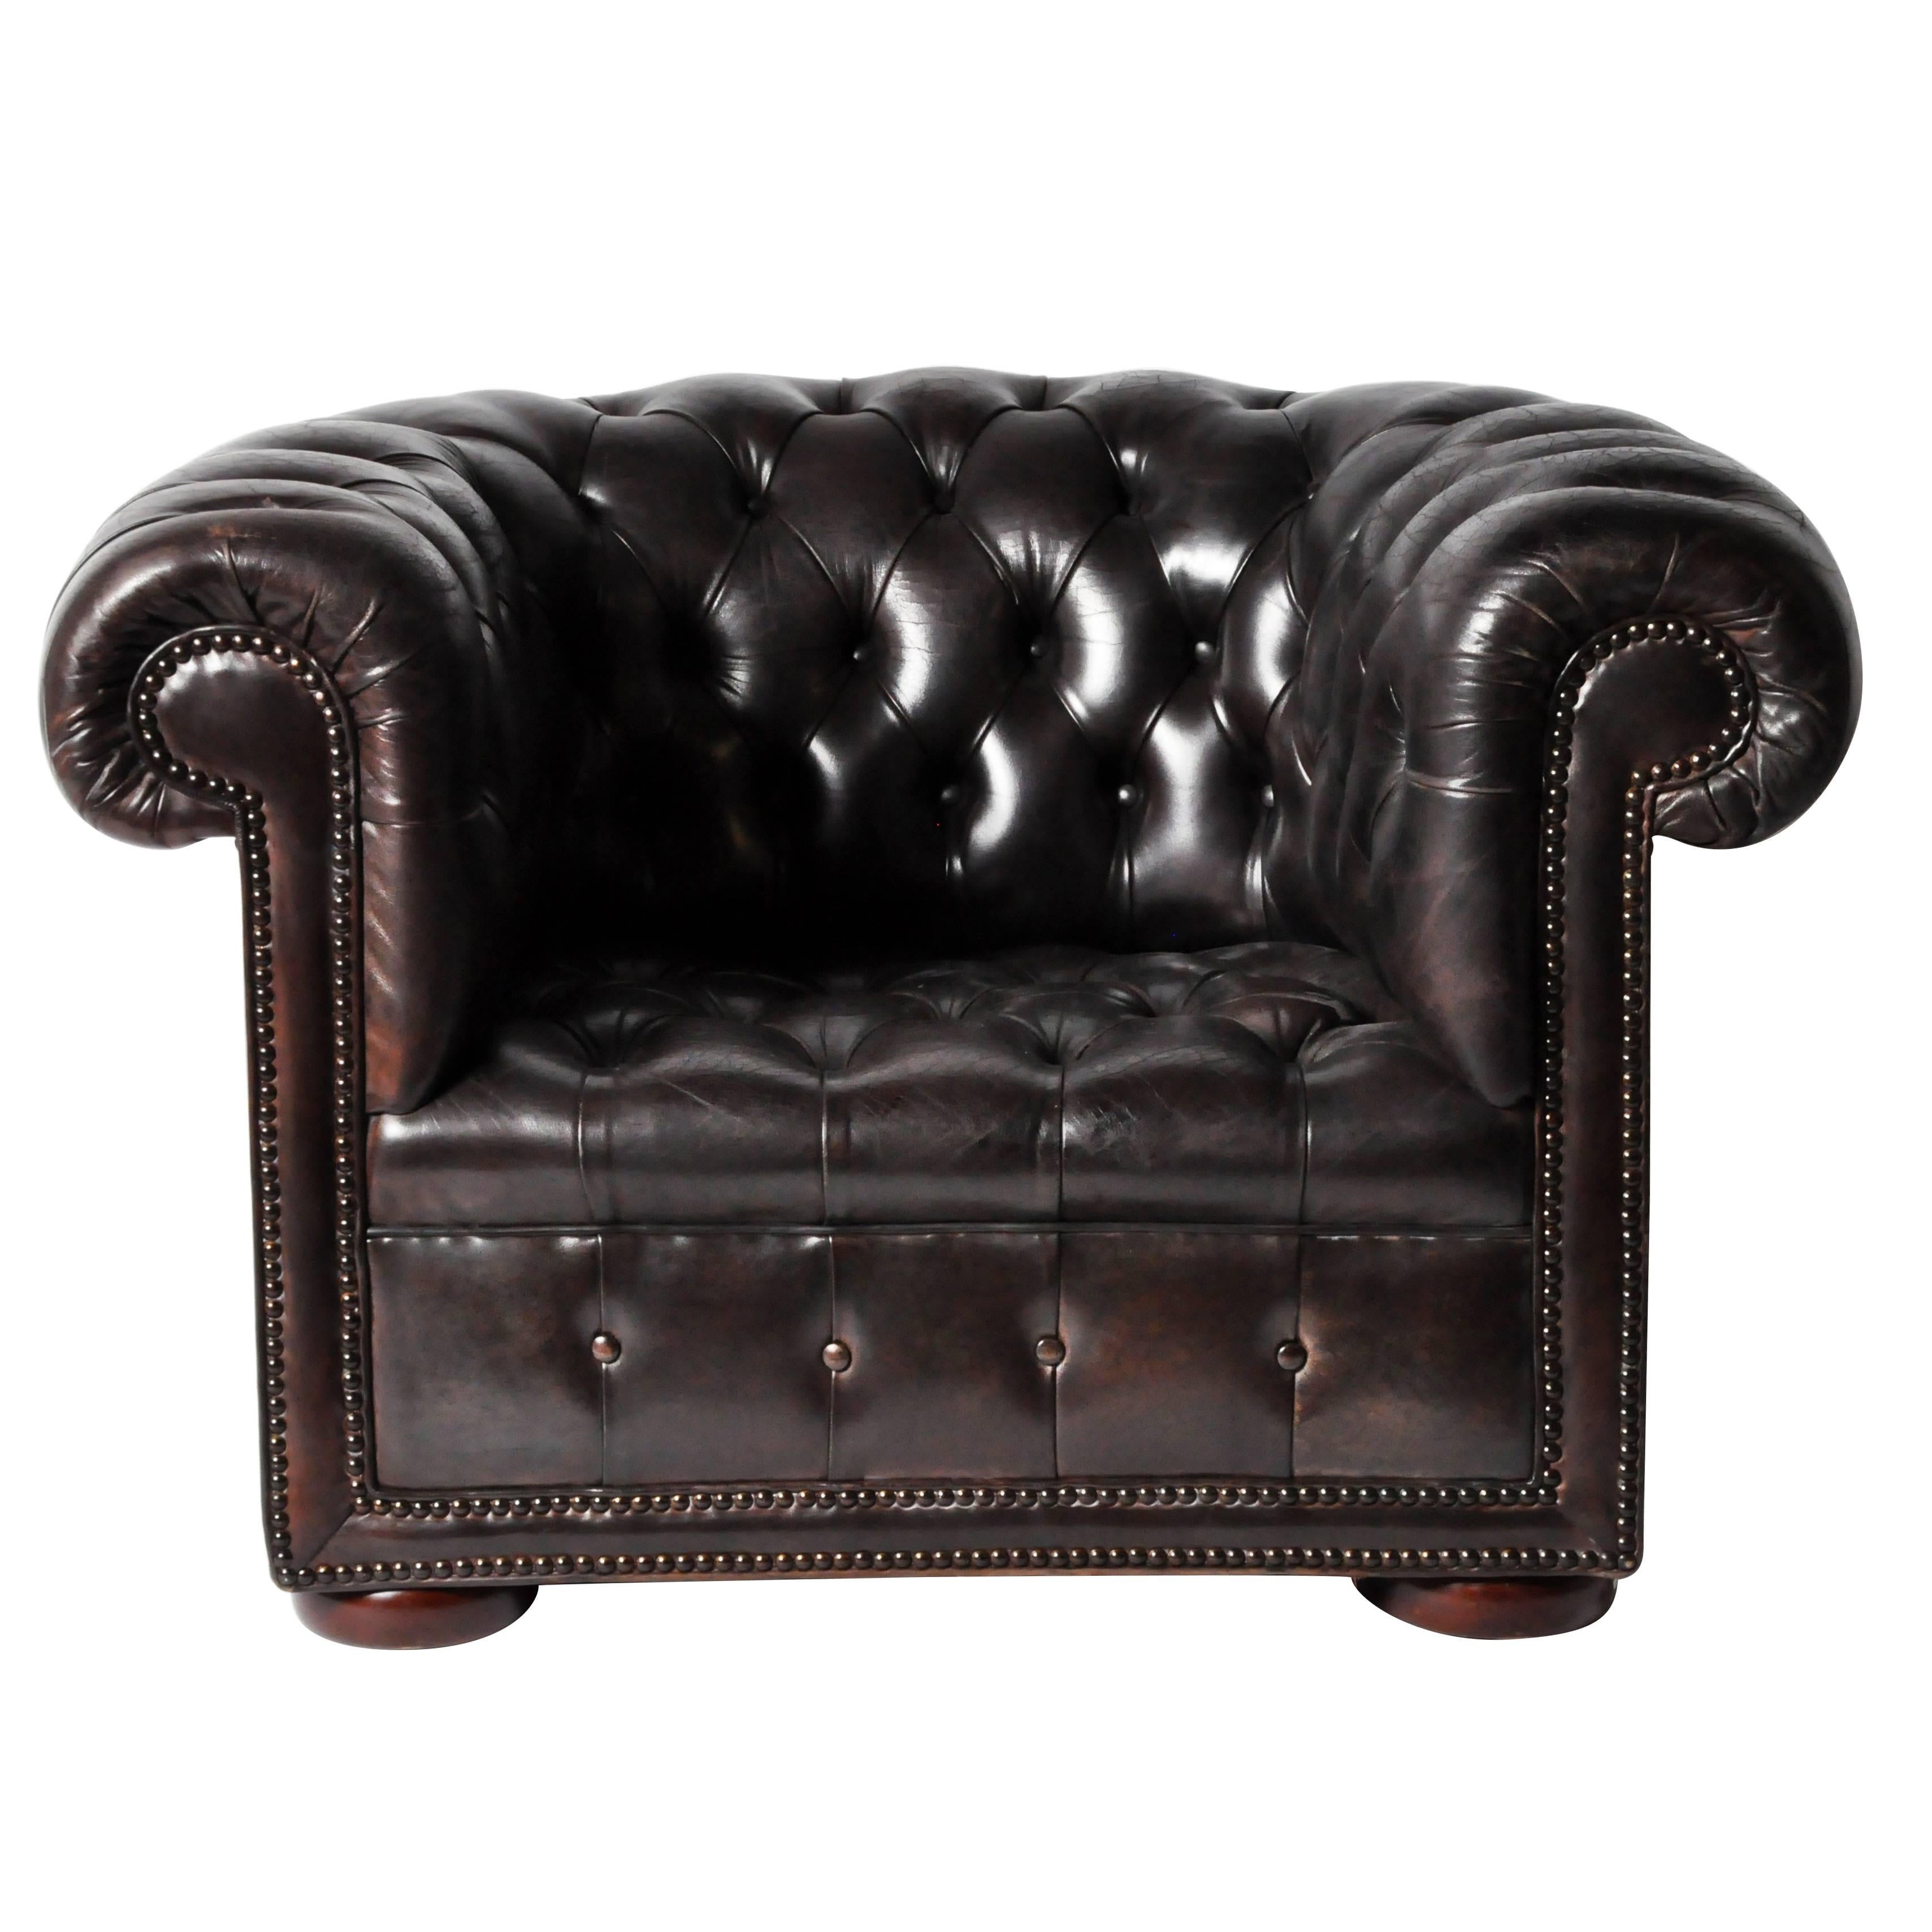 Espresso Brown Leather Chesterfield Club Chair